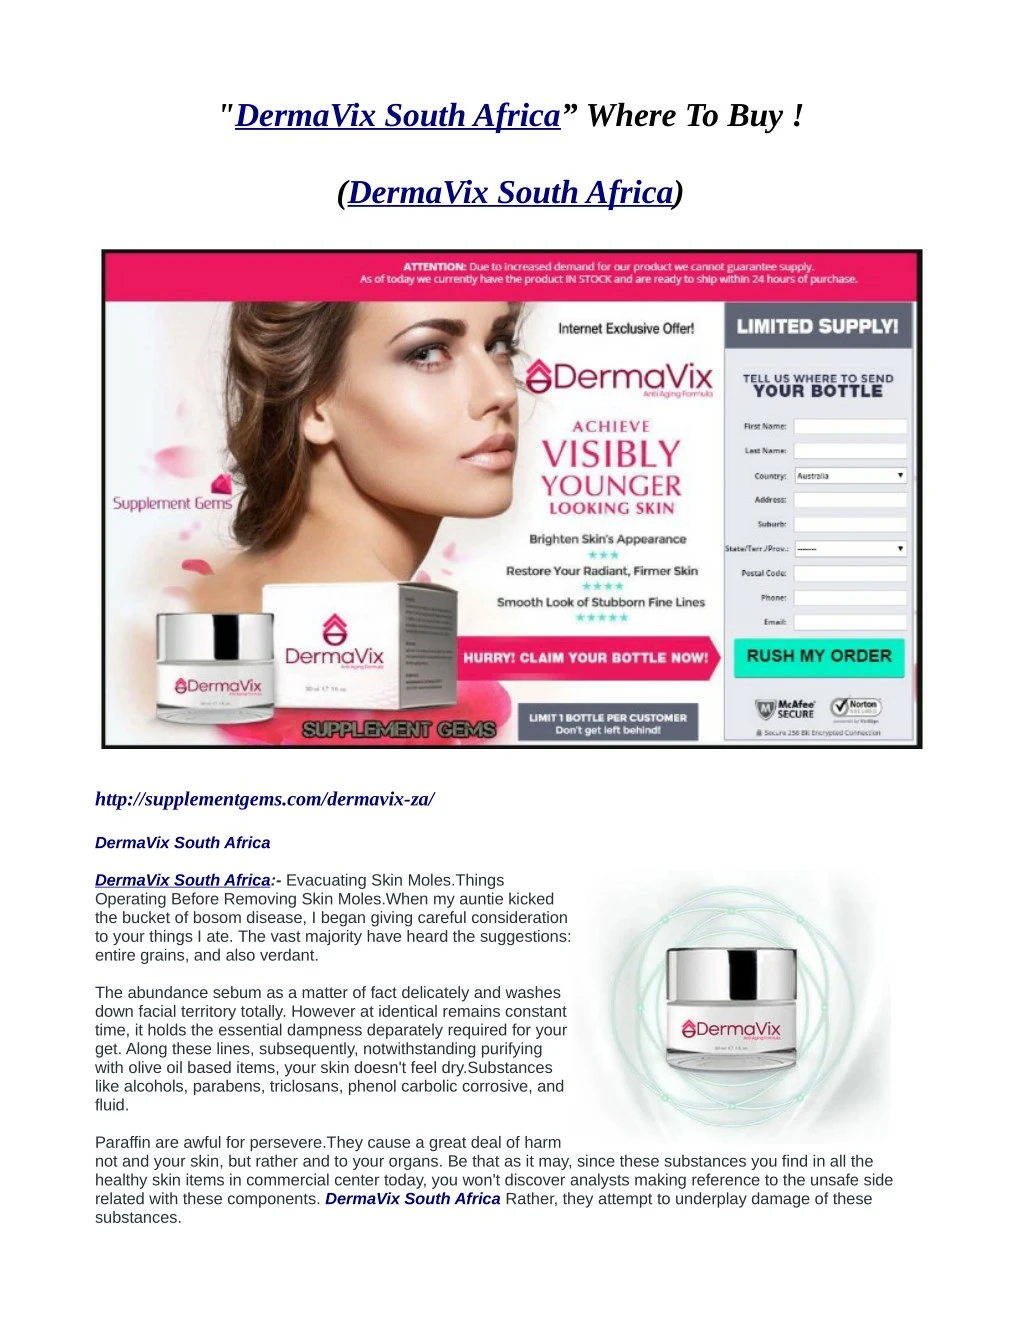 dermavix south africa where to buy